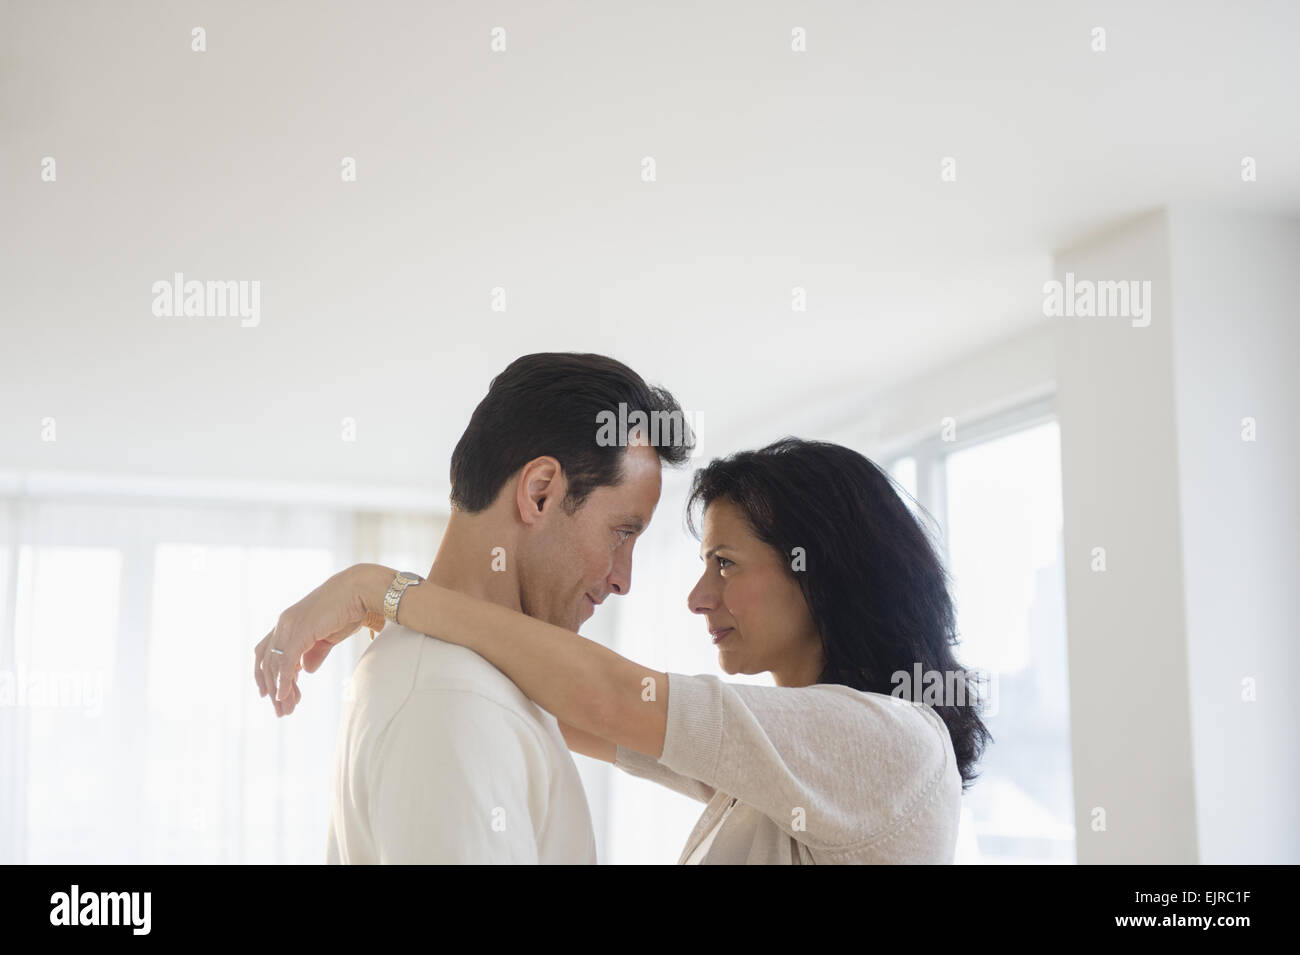 Couple hugging indoors Banque D'Images